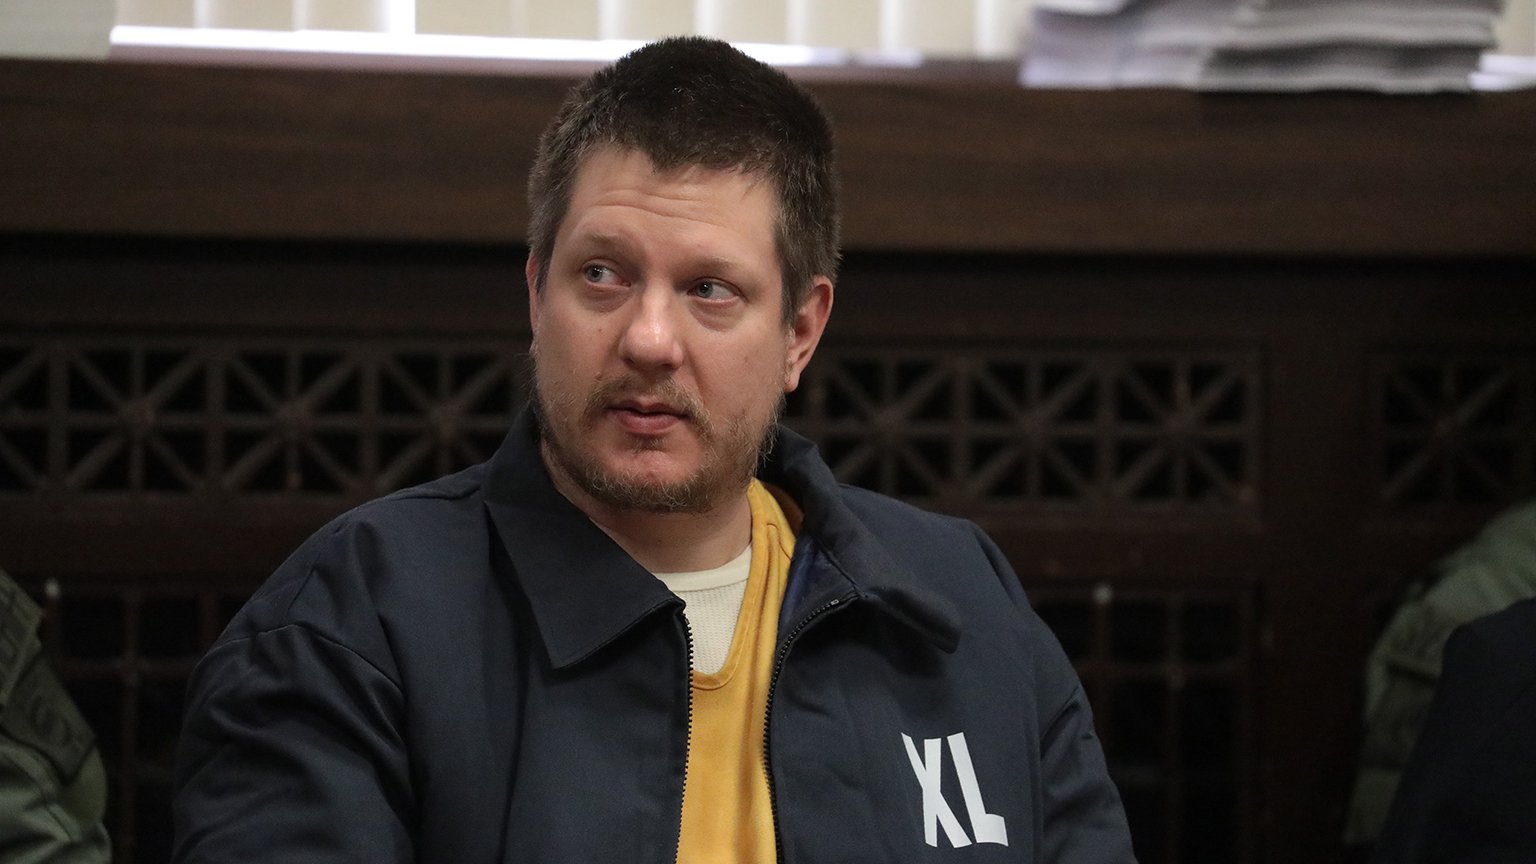 Former Chicago police Officer Jason Van Dyke listens in during his hearing at the Leighton Criminal Court Building, Friday, Dec. 14, 2018. (Antonio Perez / Chicago Tribune / pool)